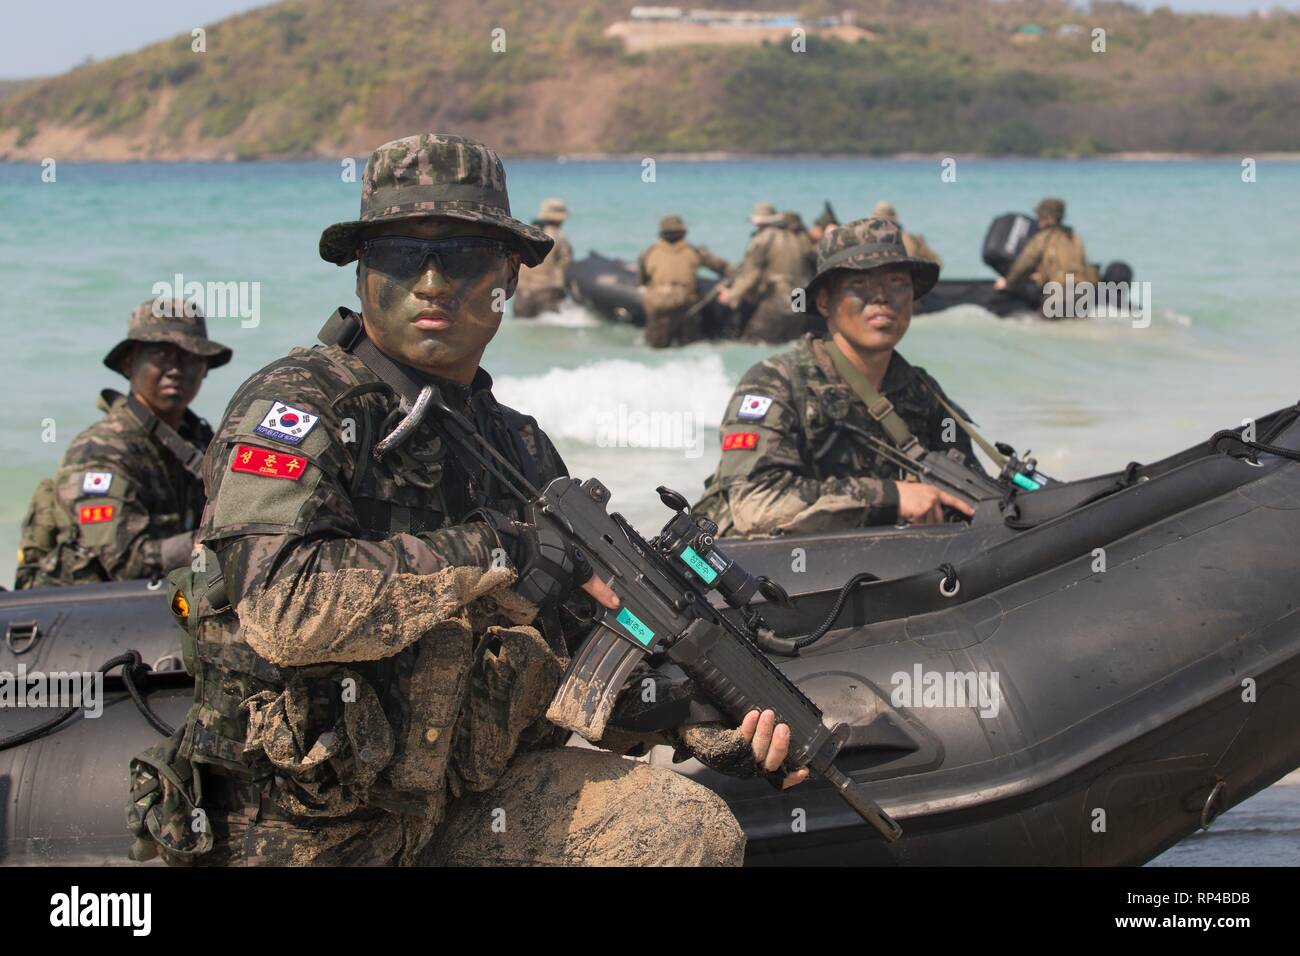 South Korean Marines with rubber raiding rafts at an amphibious assault exercise during Cobra Gold 19 at Hat Yao Beach February 15, 2019 in Sattahip, Thailand. Cobra Gold is the largest annual joint military cooperation exercise in the Indo-Pacific region. Stock Photo